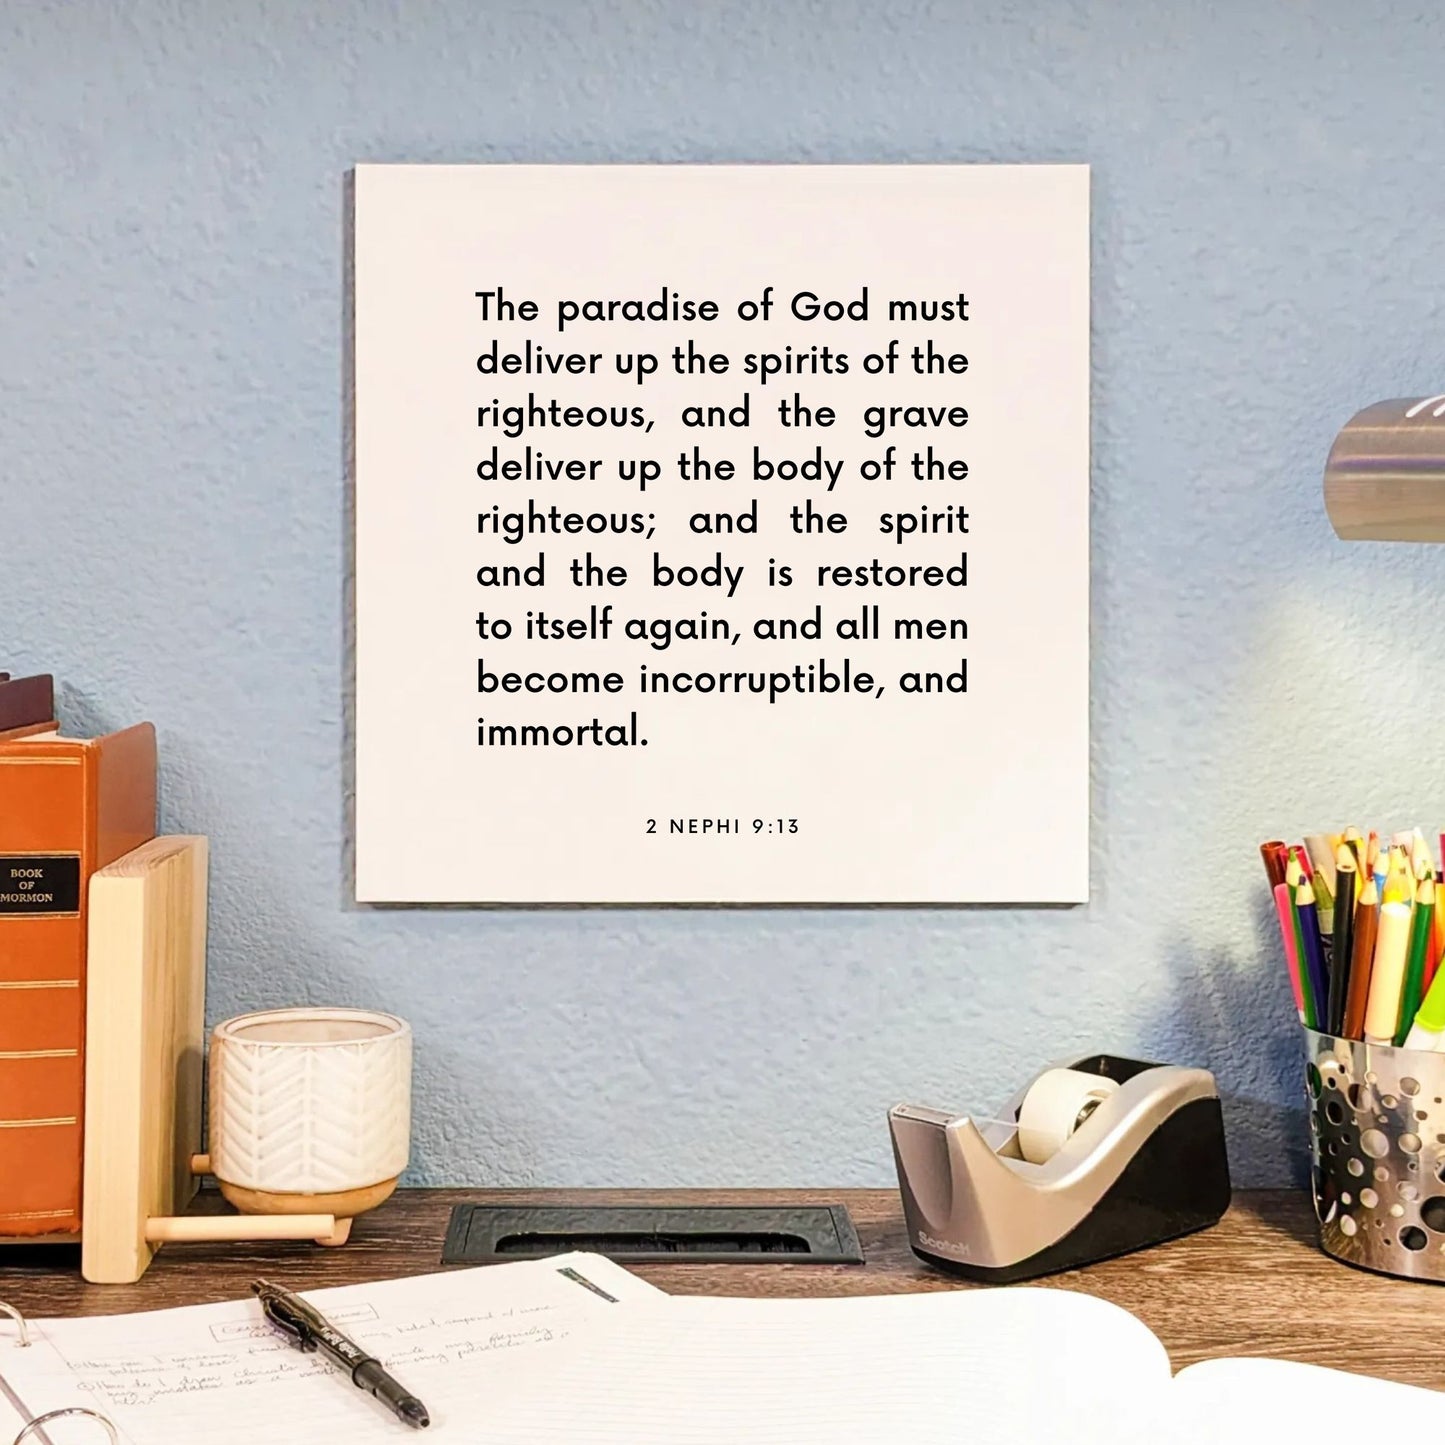 Desk mouting of the scripture tile for 2 Nephi 9:13 - "The spirit and the body is restored to itself again"